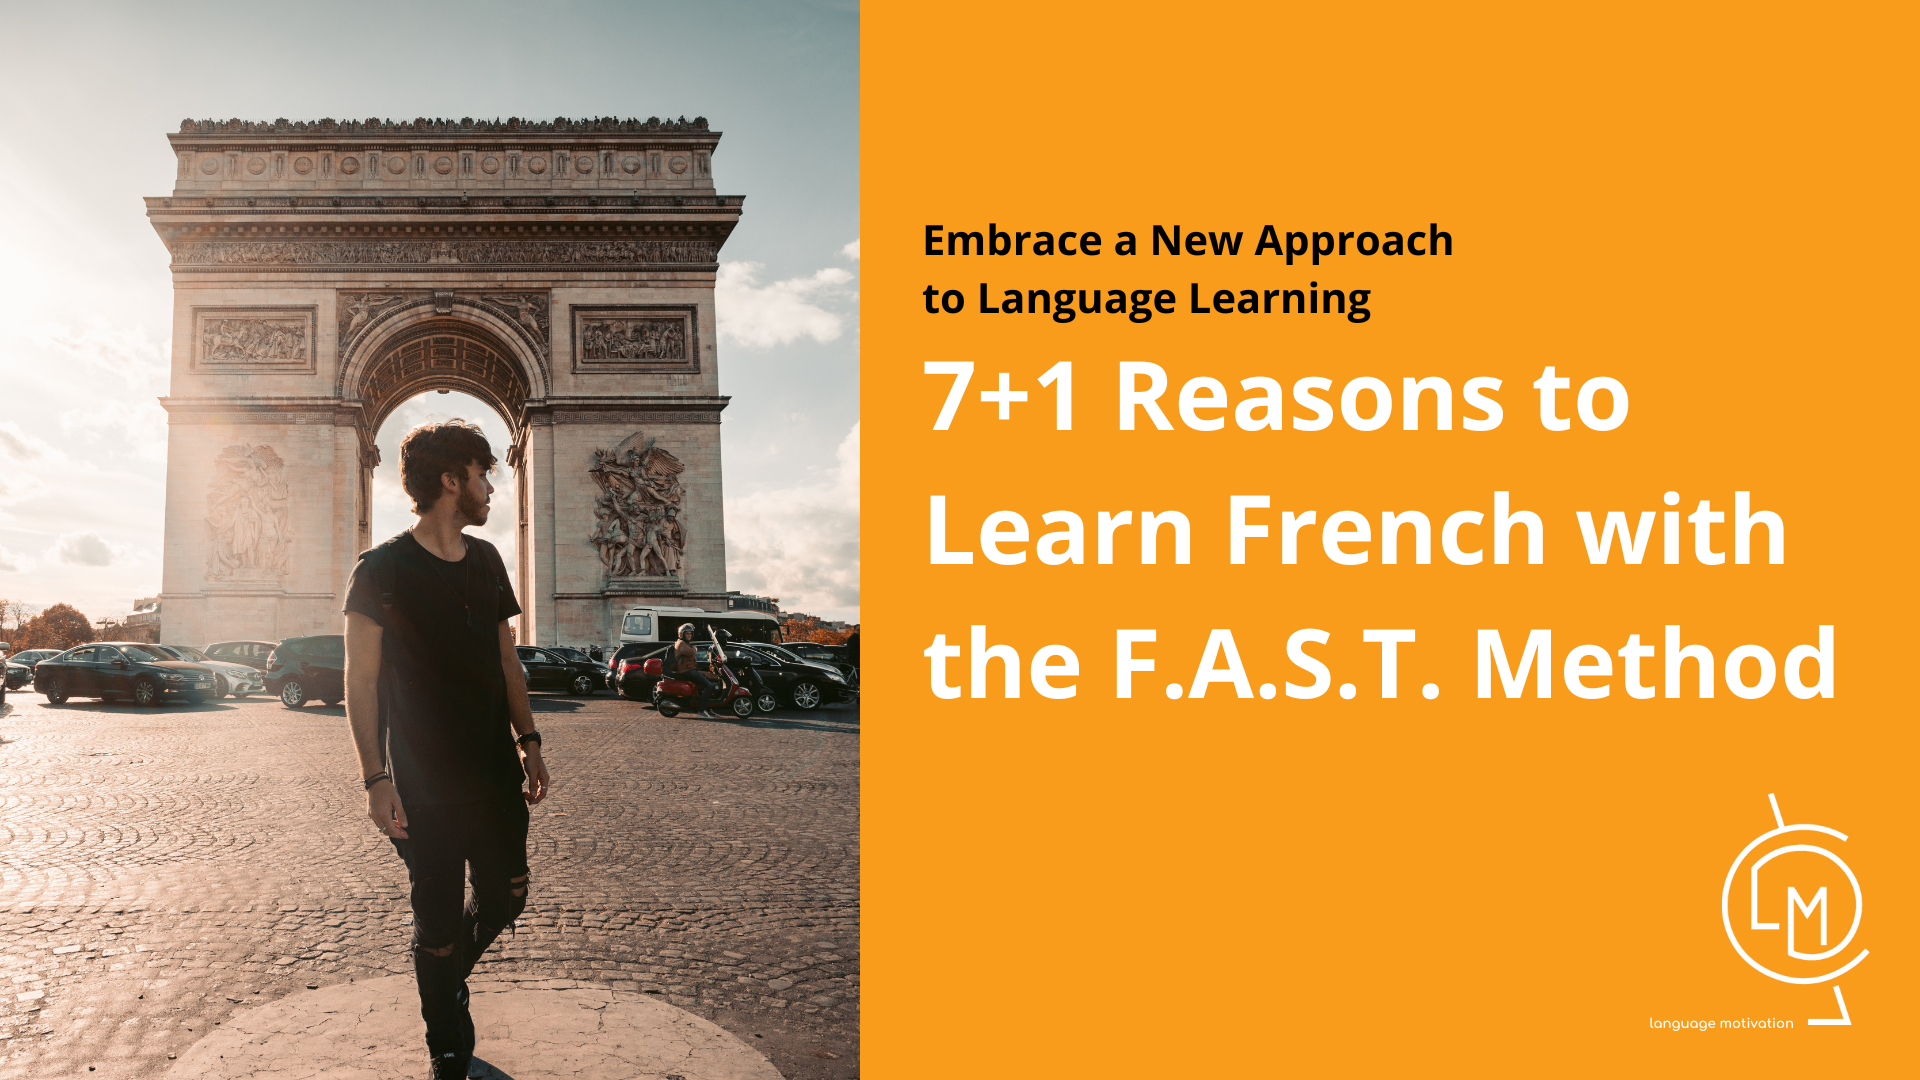 7+1 Reasons to Learn French with the F.A.S.T. Method